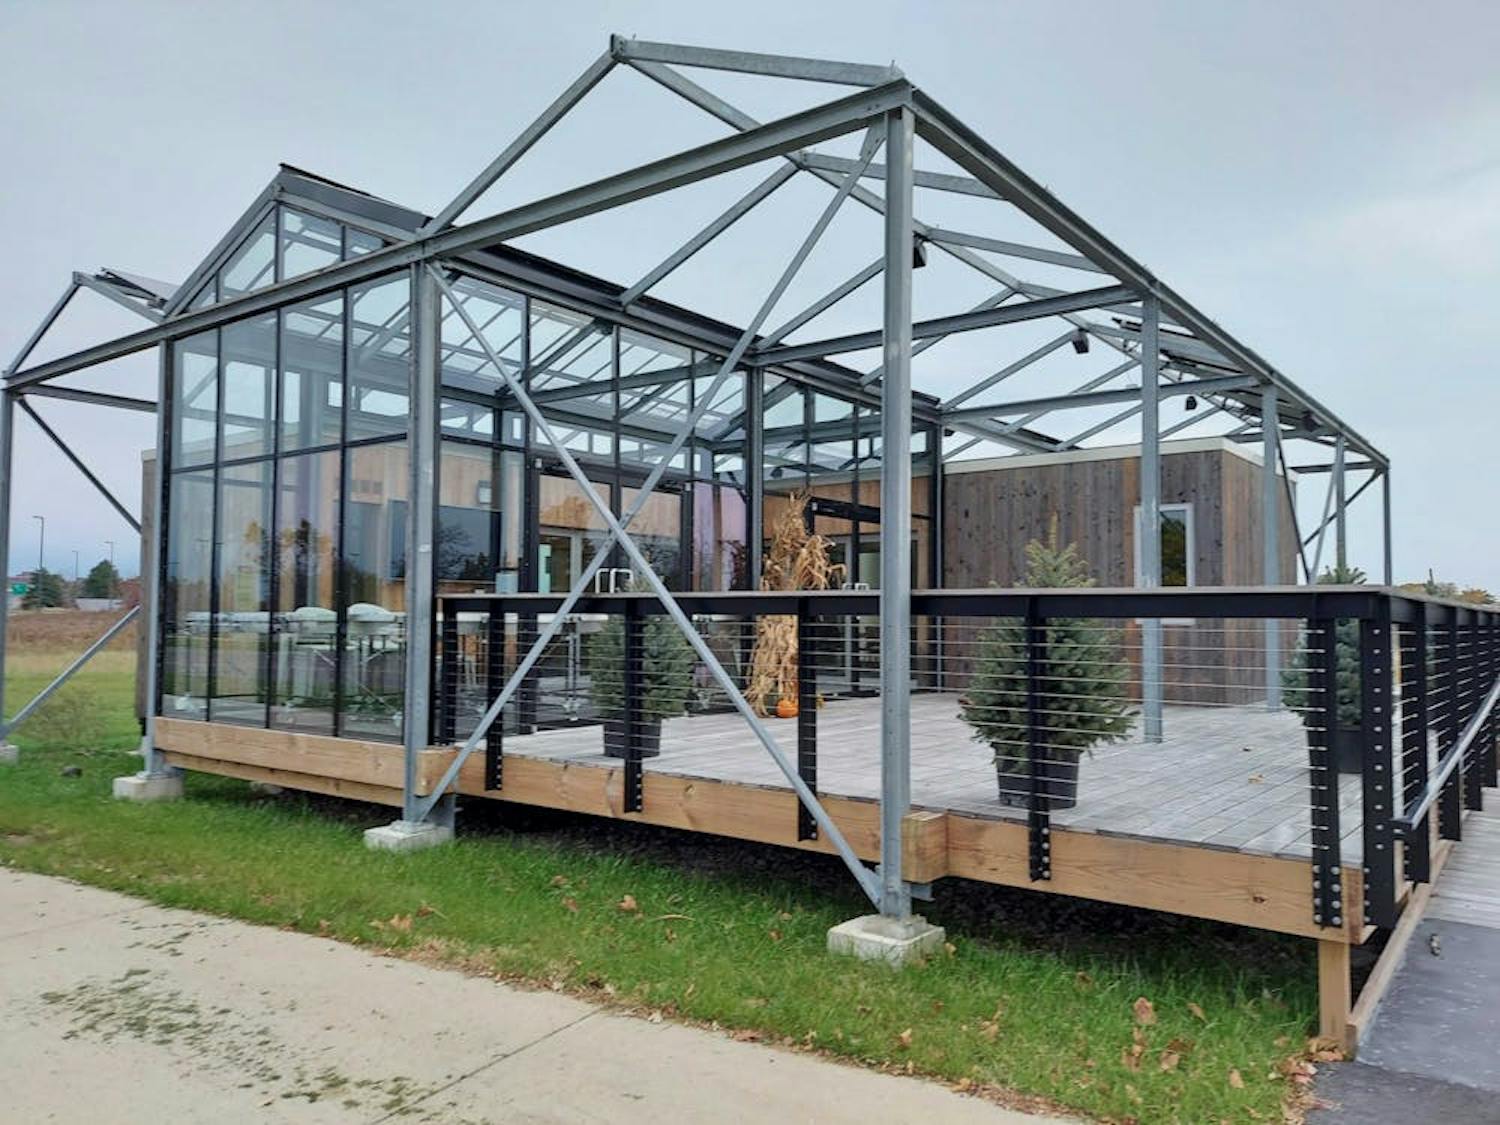 The GRoW Home, pictured above, is a 1,100-sq.-ft. solar structure located next to the Solar Strand at the Flint Road entrance of North Campus. &nbsp;